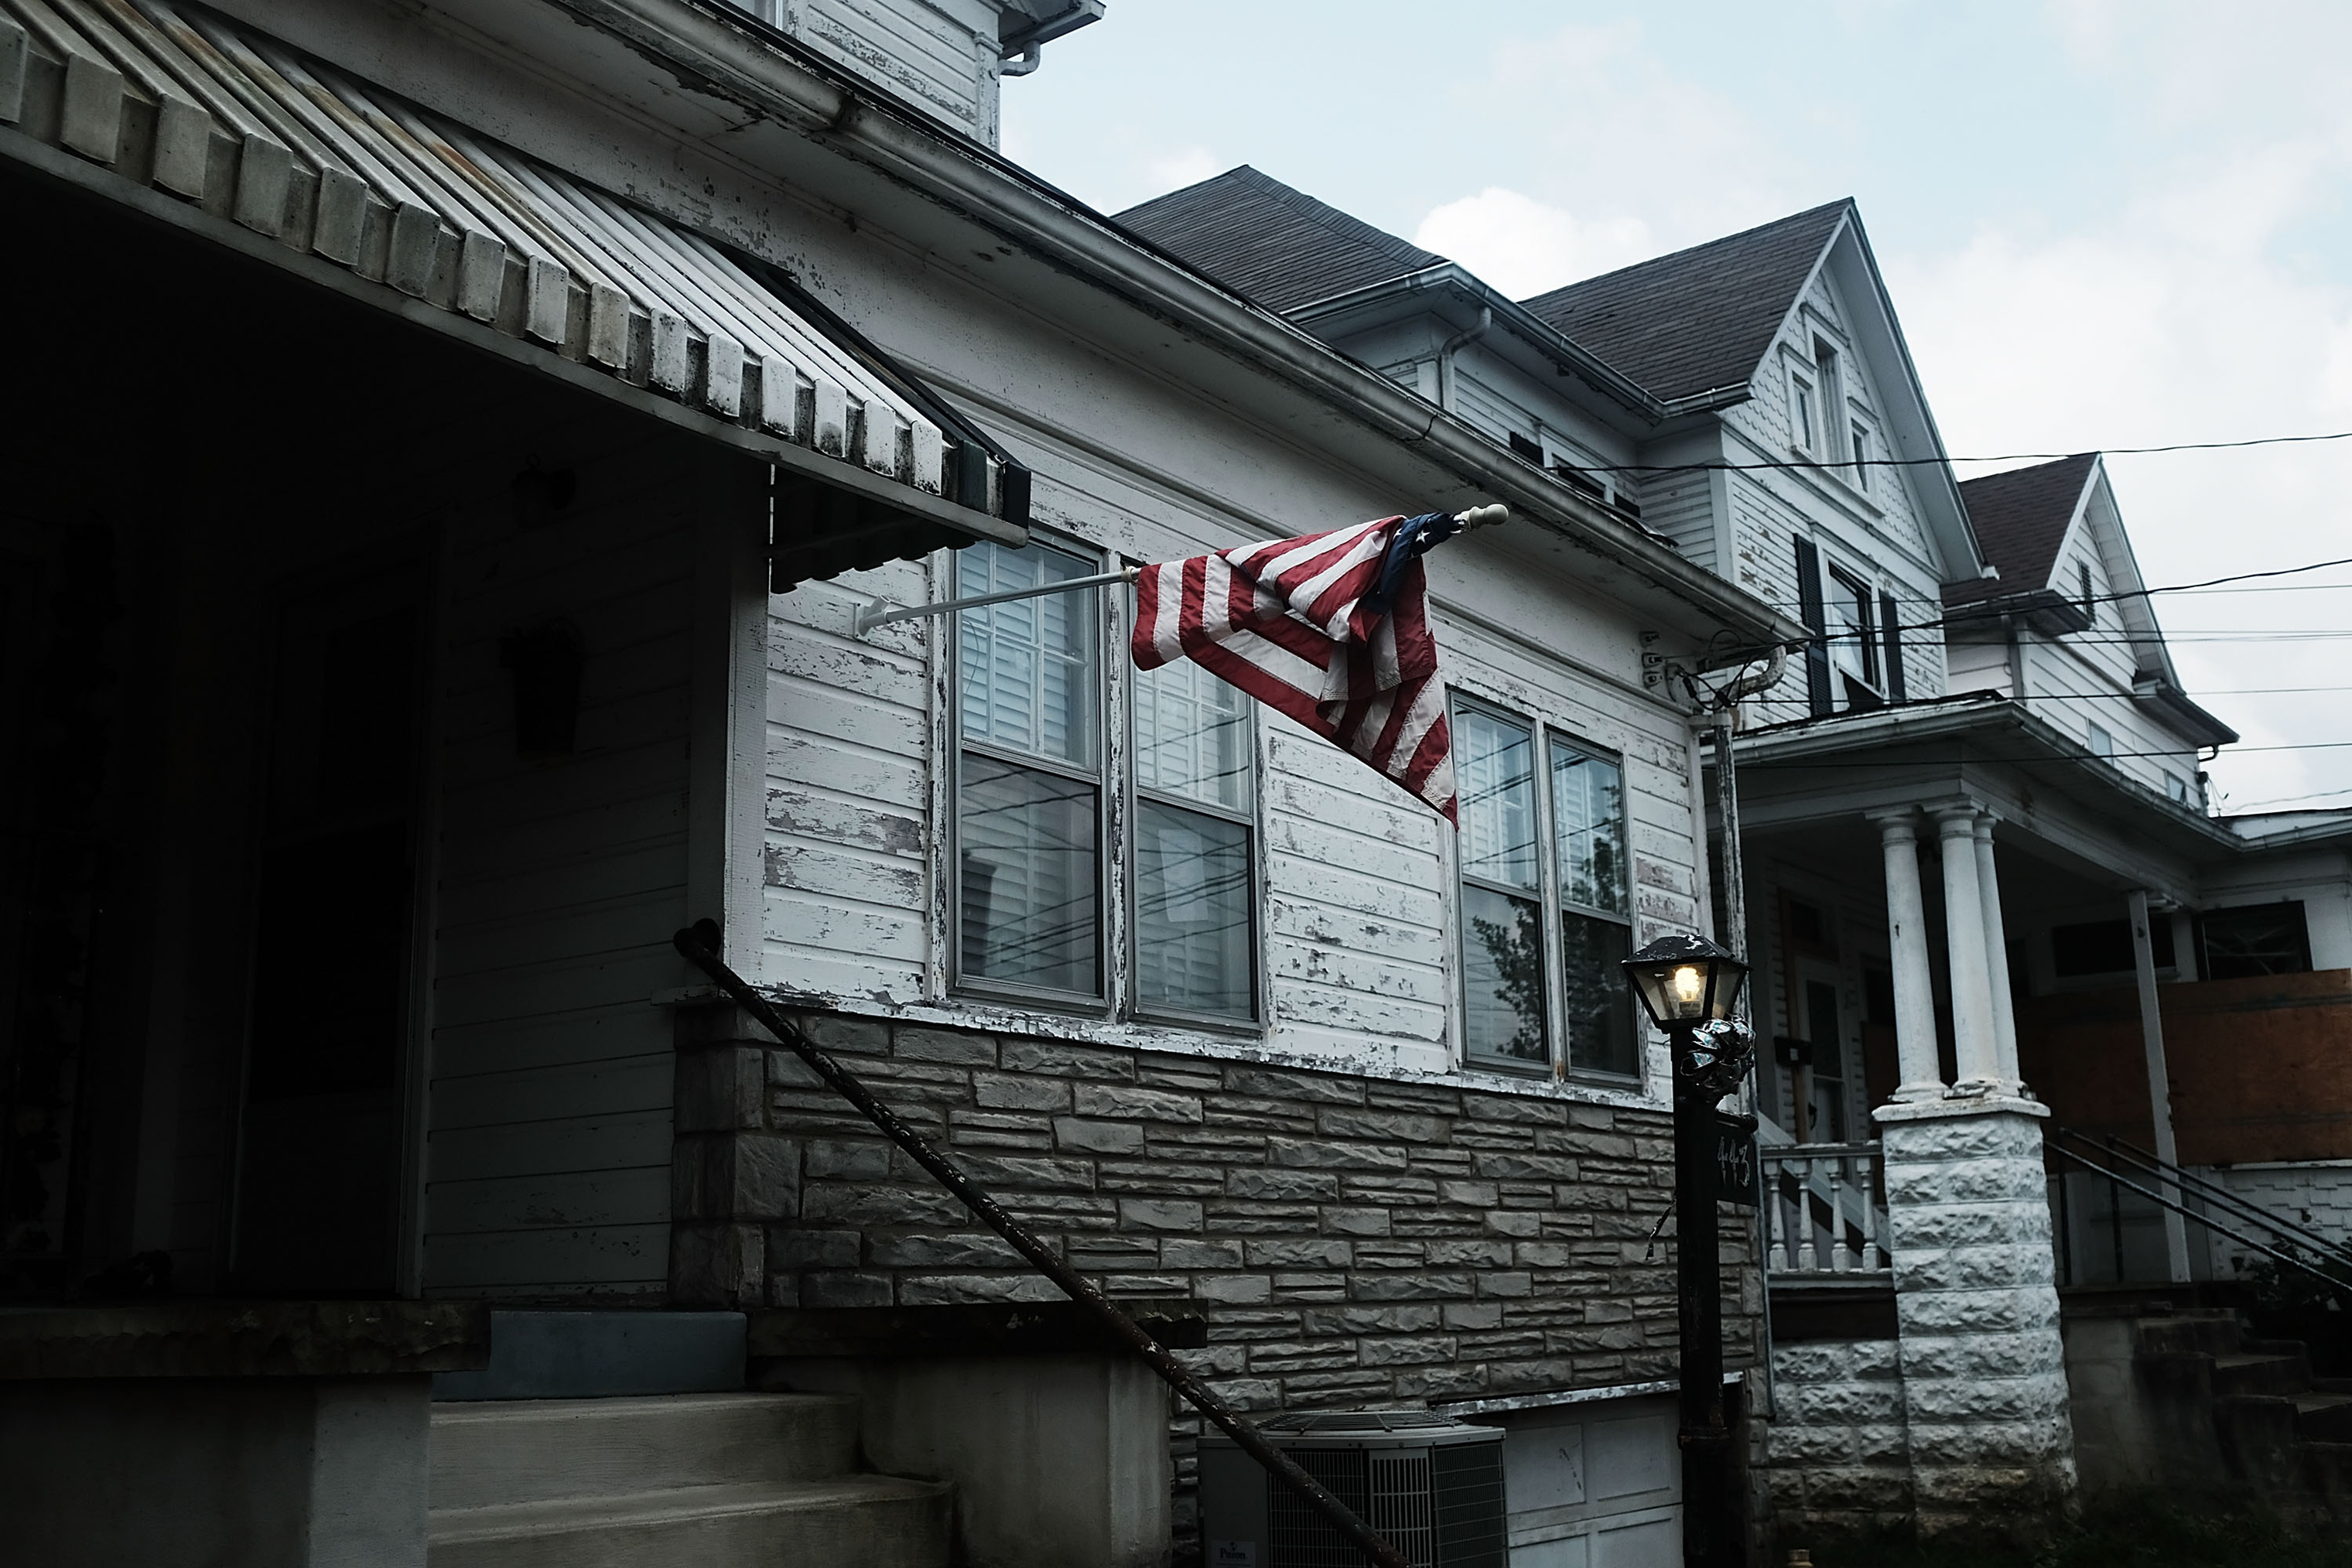 An American flag hangs outside of a home in Clarksburg, WV on Aug. 22, 2018, a state still struggling with endemic poverty and opioid abuse. (Spencer Platt—Getty Images)